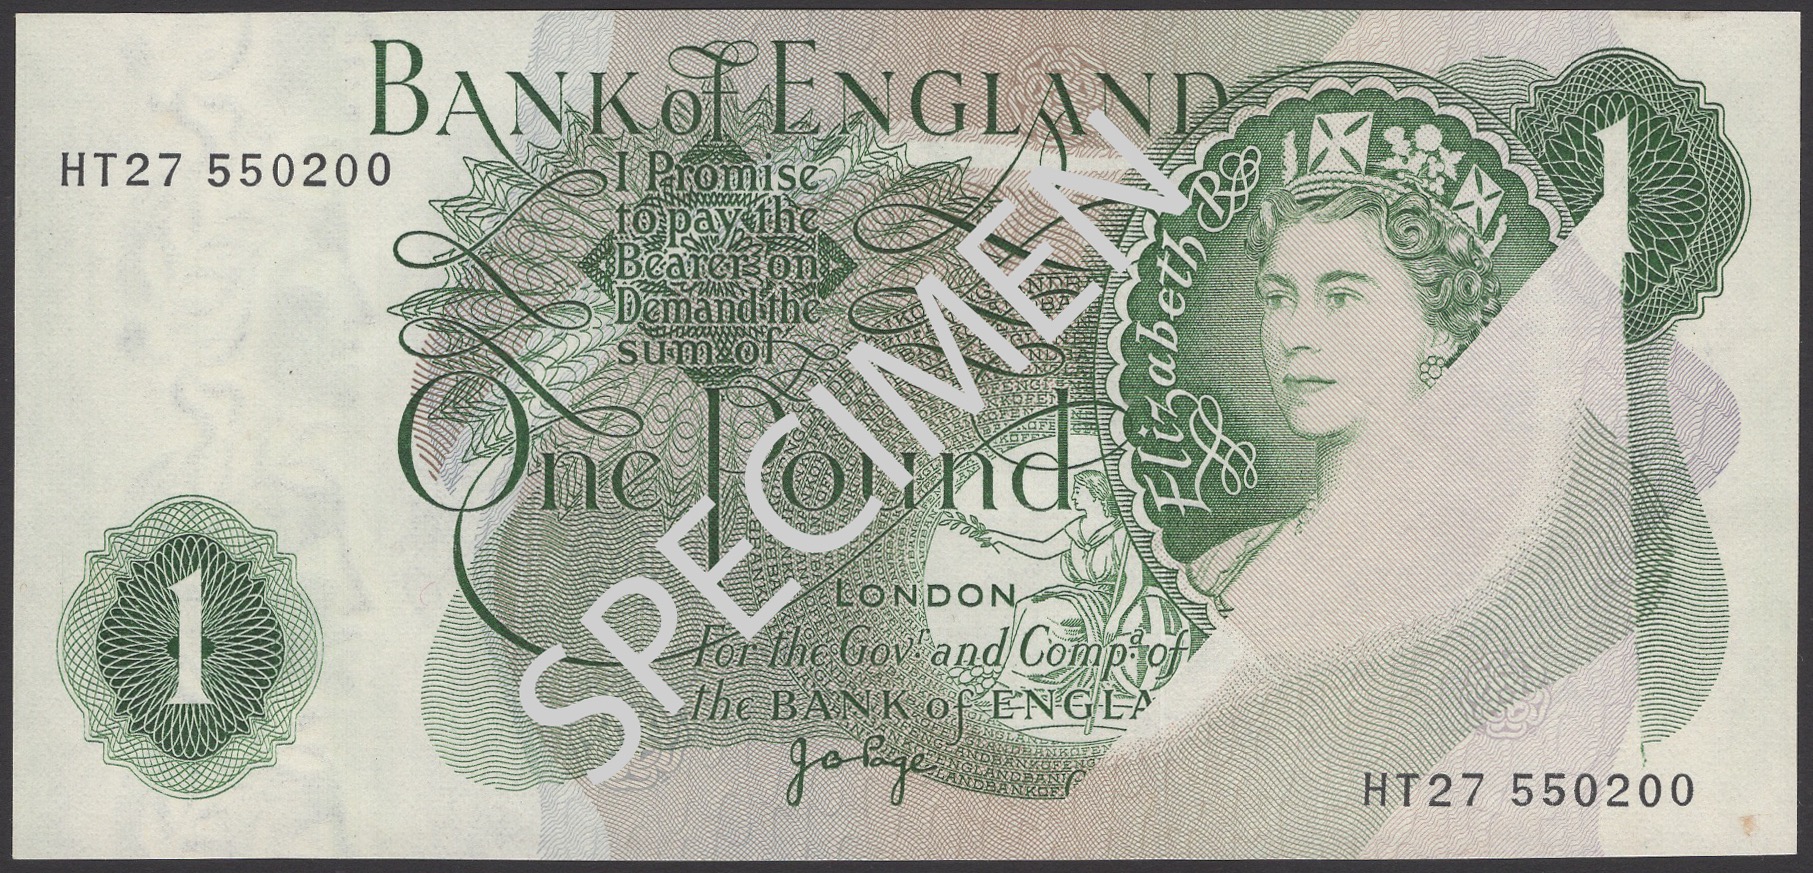 A Remarkable Collection of Bank of England Errors - Part One